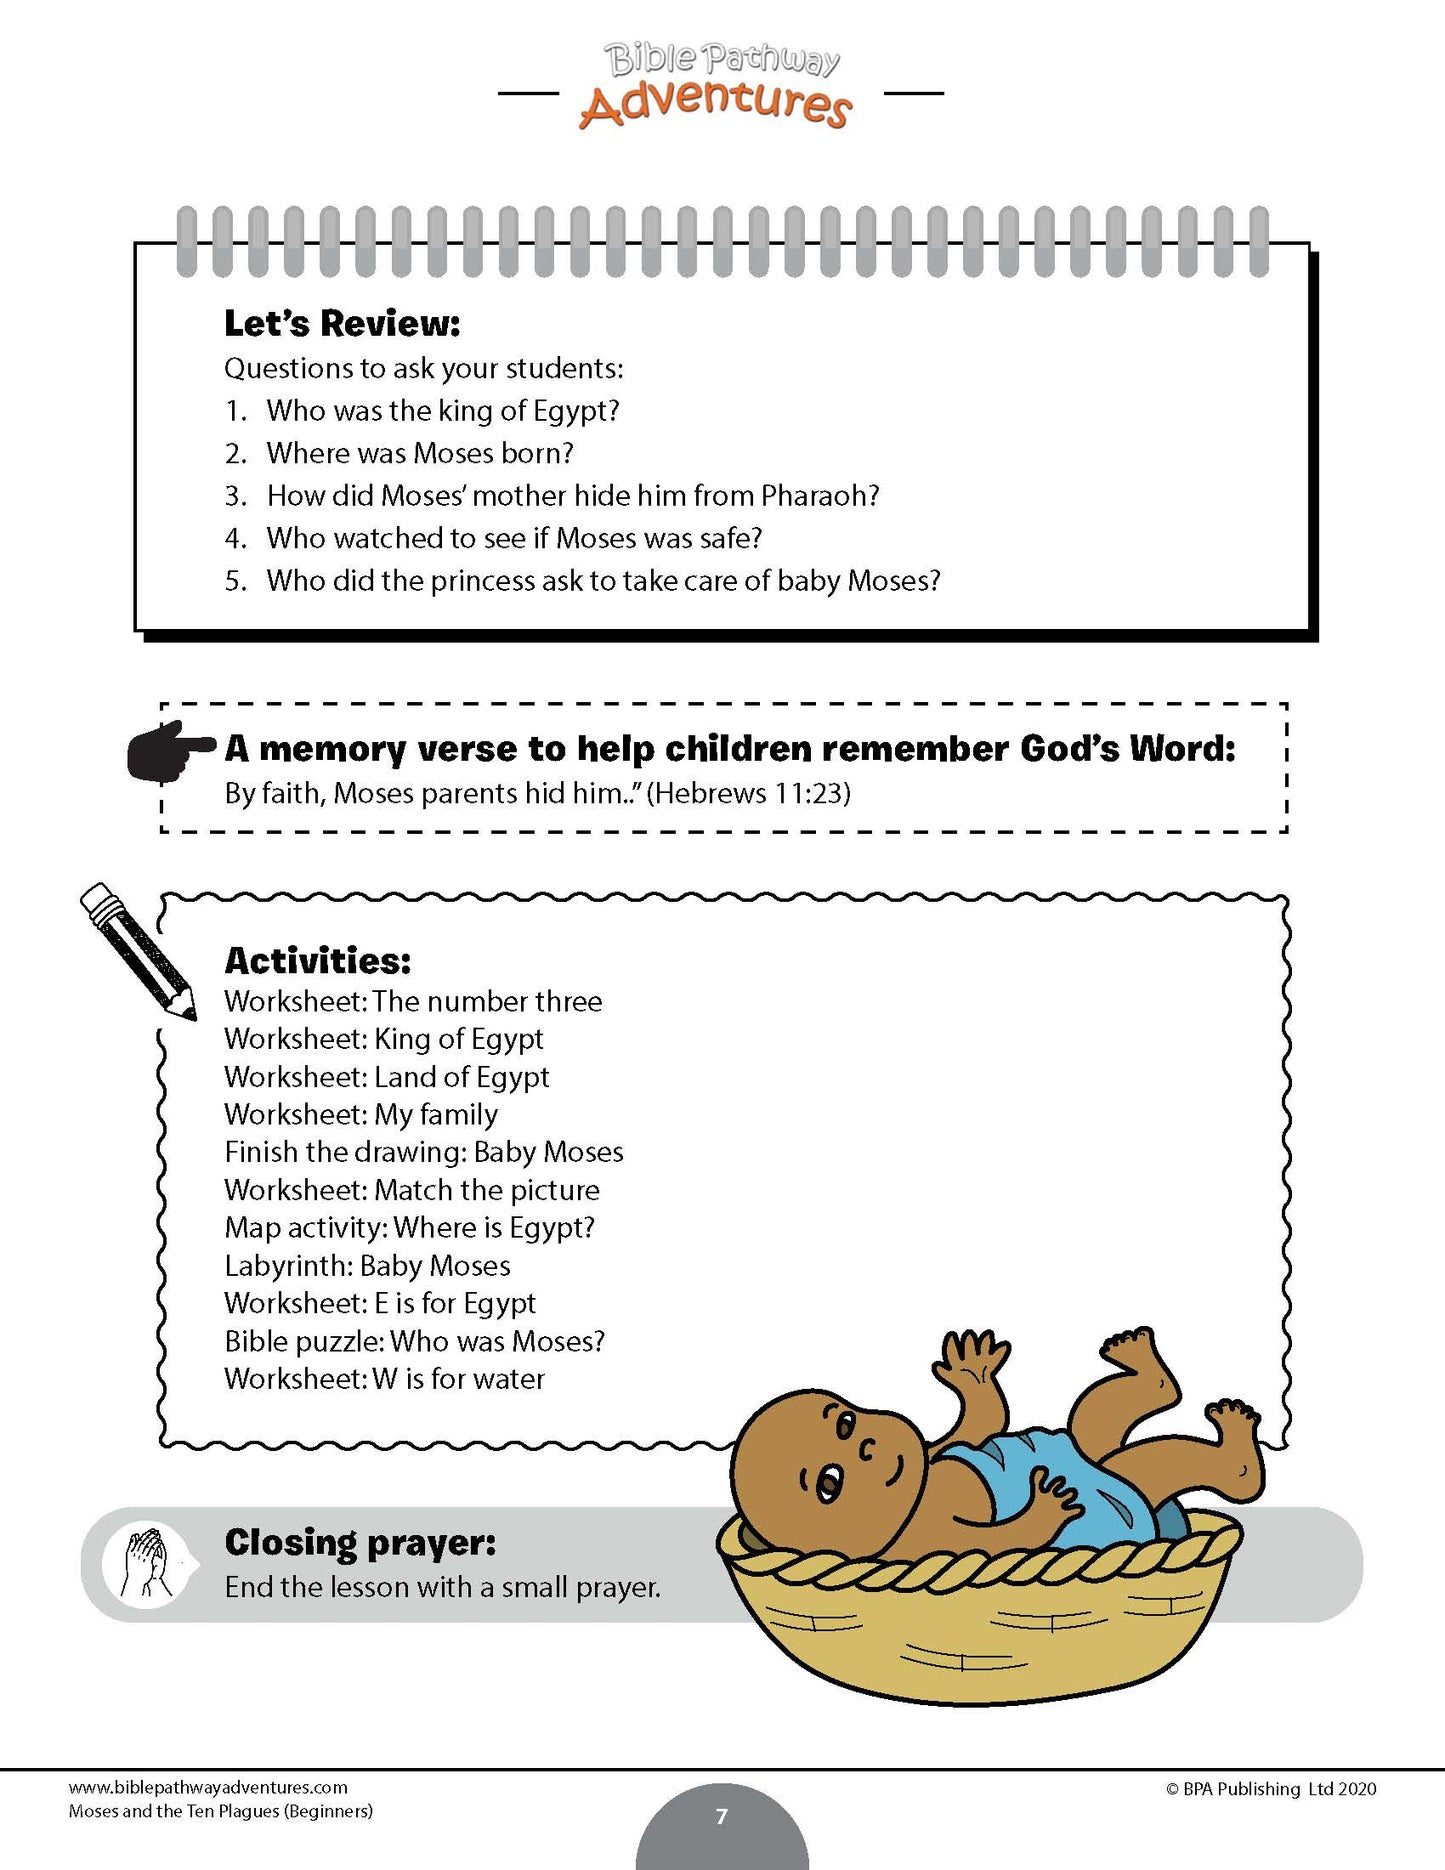 Moses and the Ten Plagues Activity Book for Beginners (PDF)